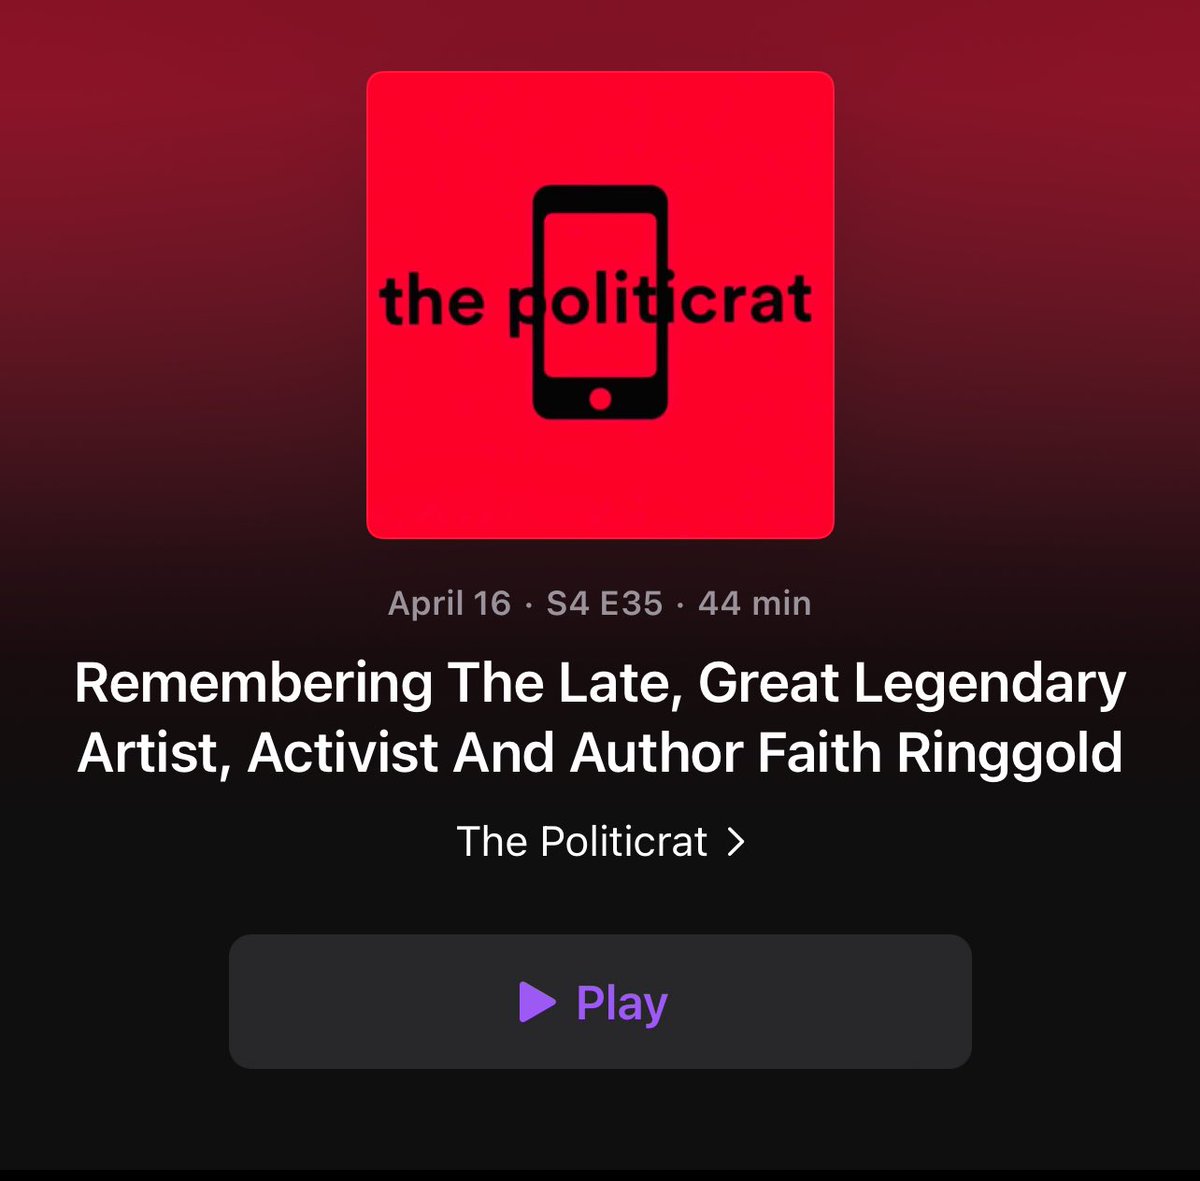 🚨🎙️NEW EPISODE 🎙️🚨 THE POLITICRAT daily #podcast tinyurl.com/3vb6kjux Remembering The Late Great Legendary Artist, Activist And Author Faith Ringgold 🖤🙏🏿 @FaithRinggold Also: MLK Jr’s “Letter From Birmingham Jail”, 61 Years Later #ApplePodcasts #FaithRinggold #MLK